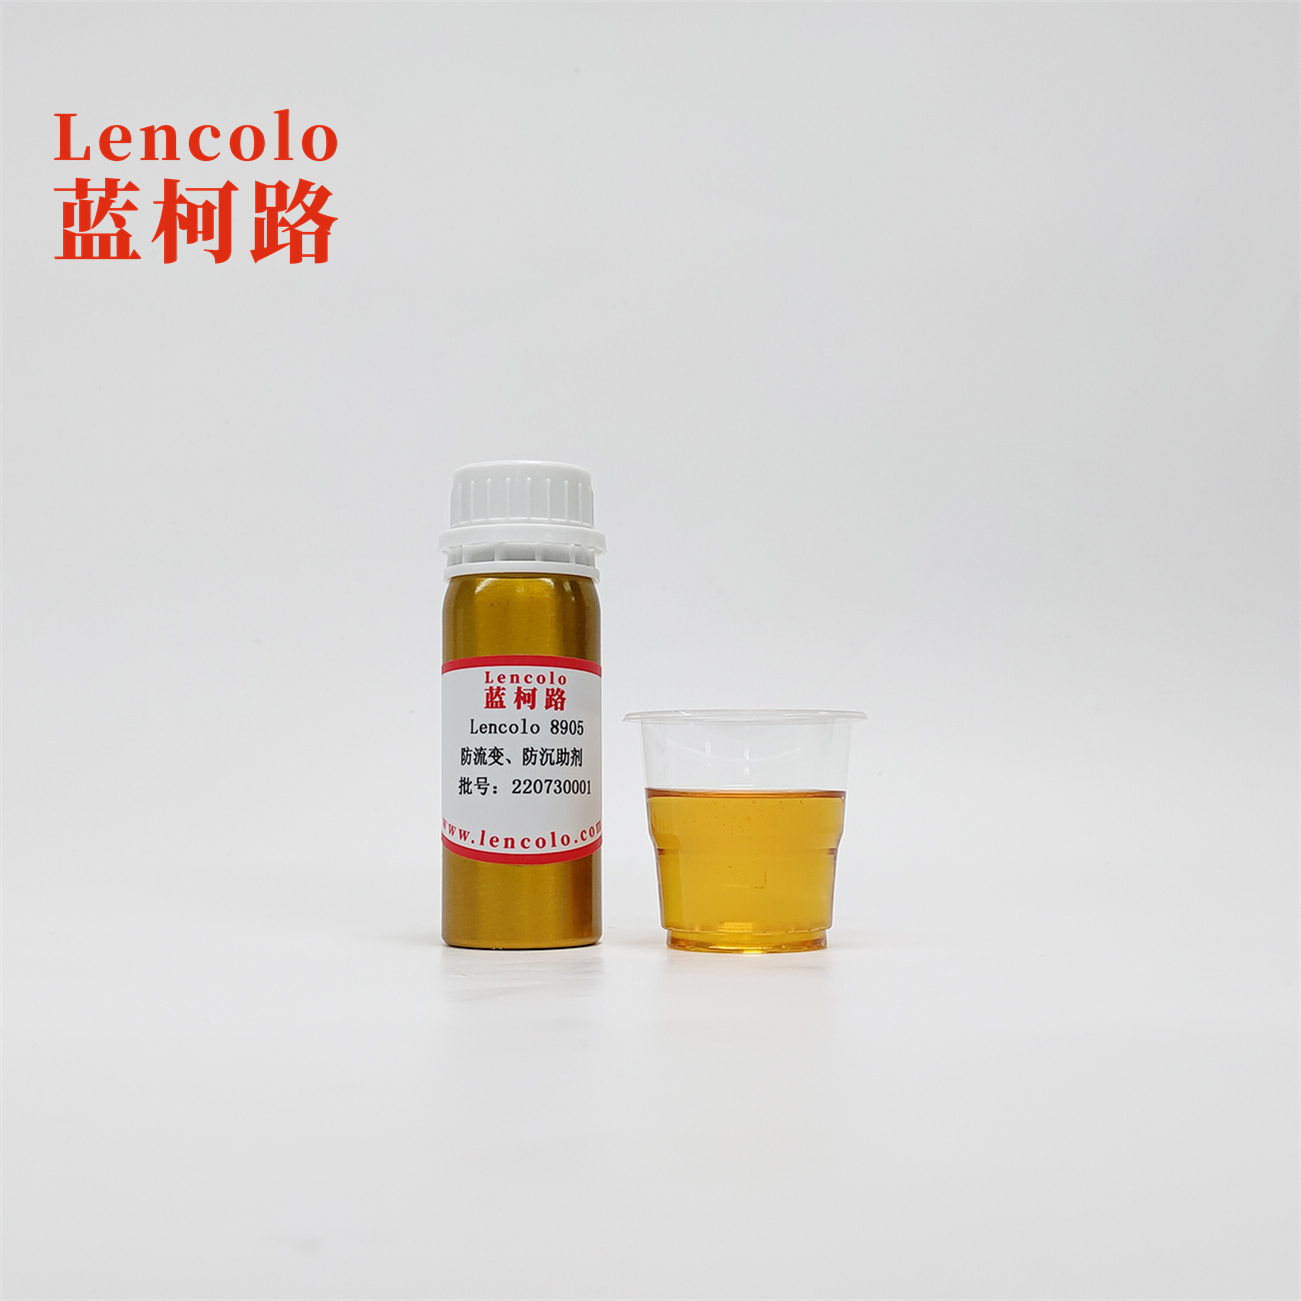 Lencolo 8905  Anti-rheology Anti-settlement additive liquid rheology agent for Polyester, acrylic and alkyd solvent-borne coating systems